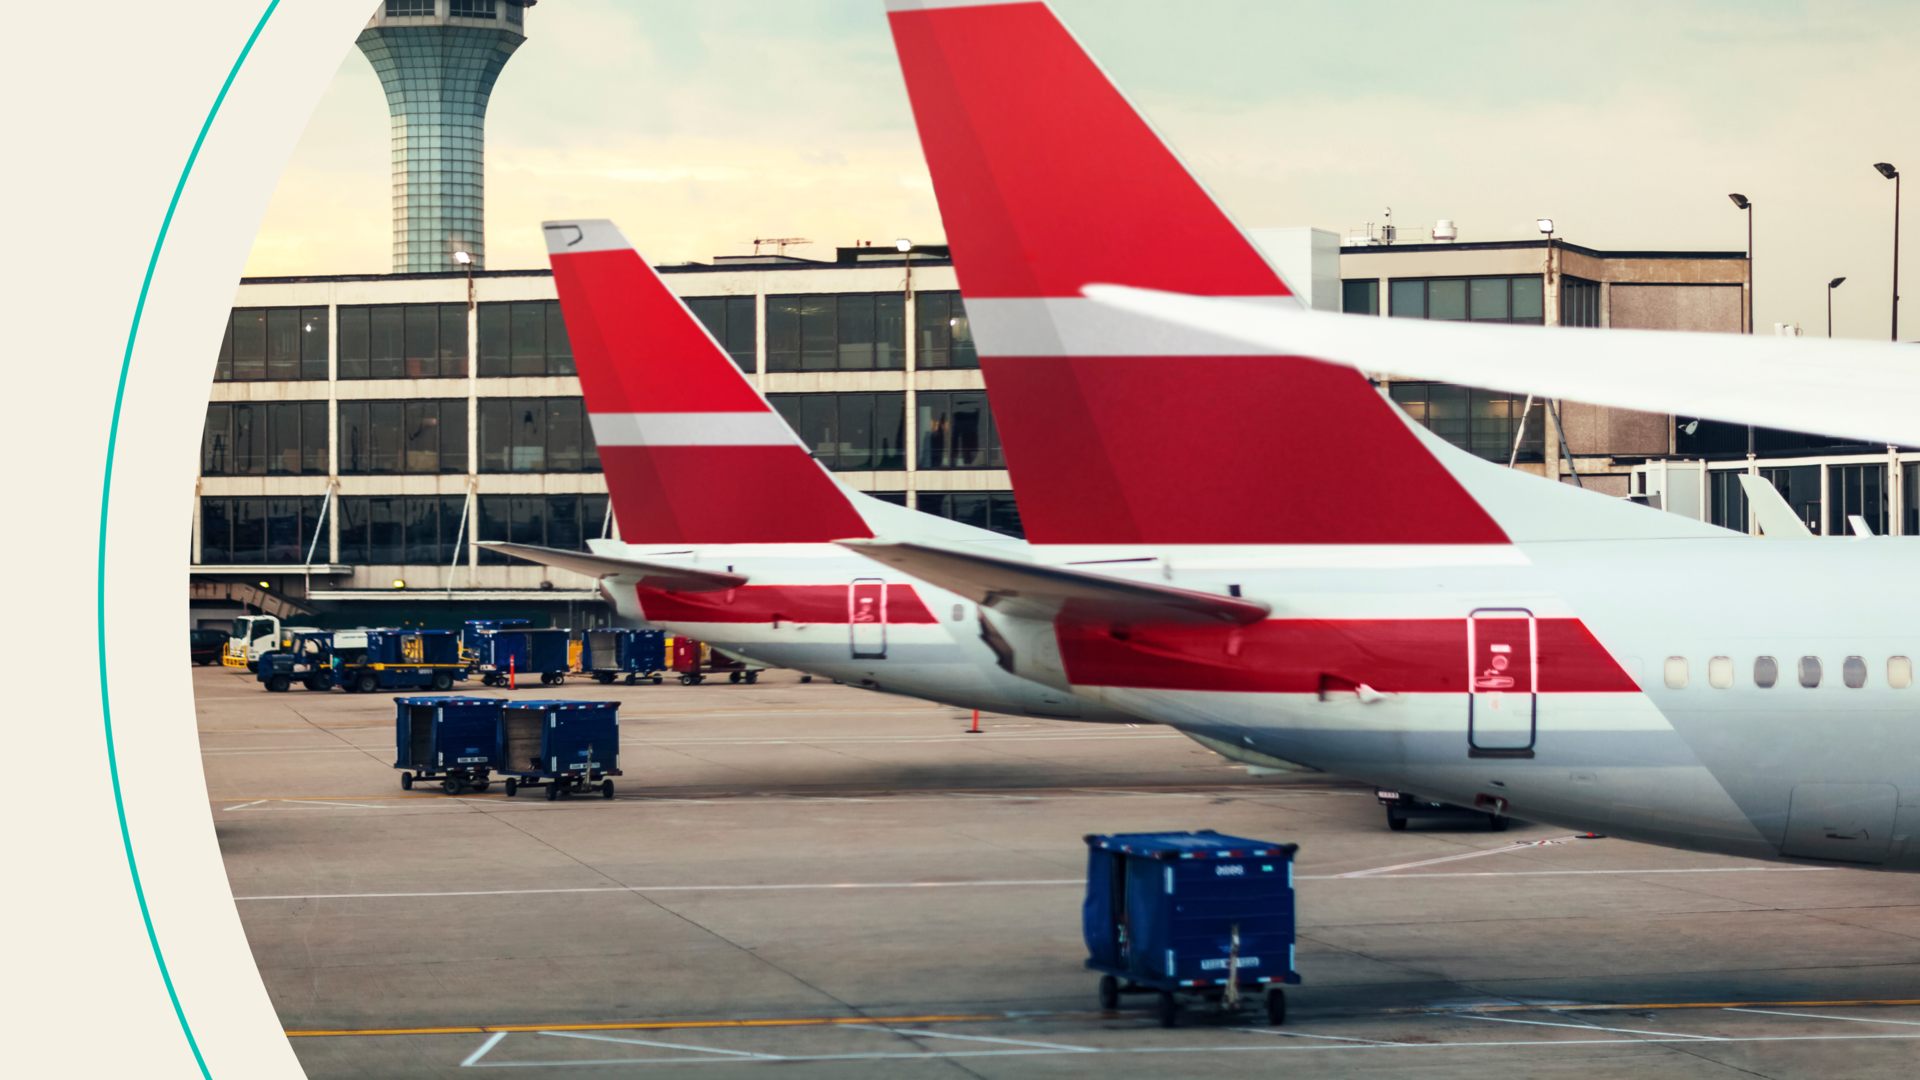 View of two airplane tails on tarmac at airport 